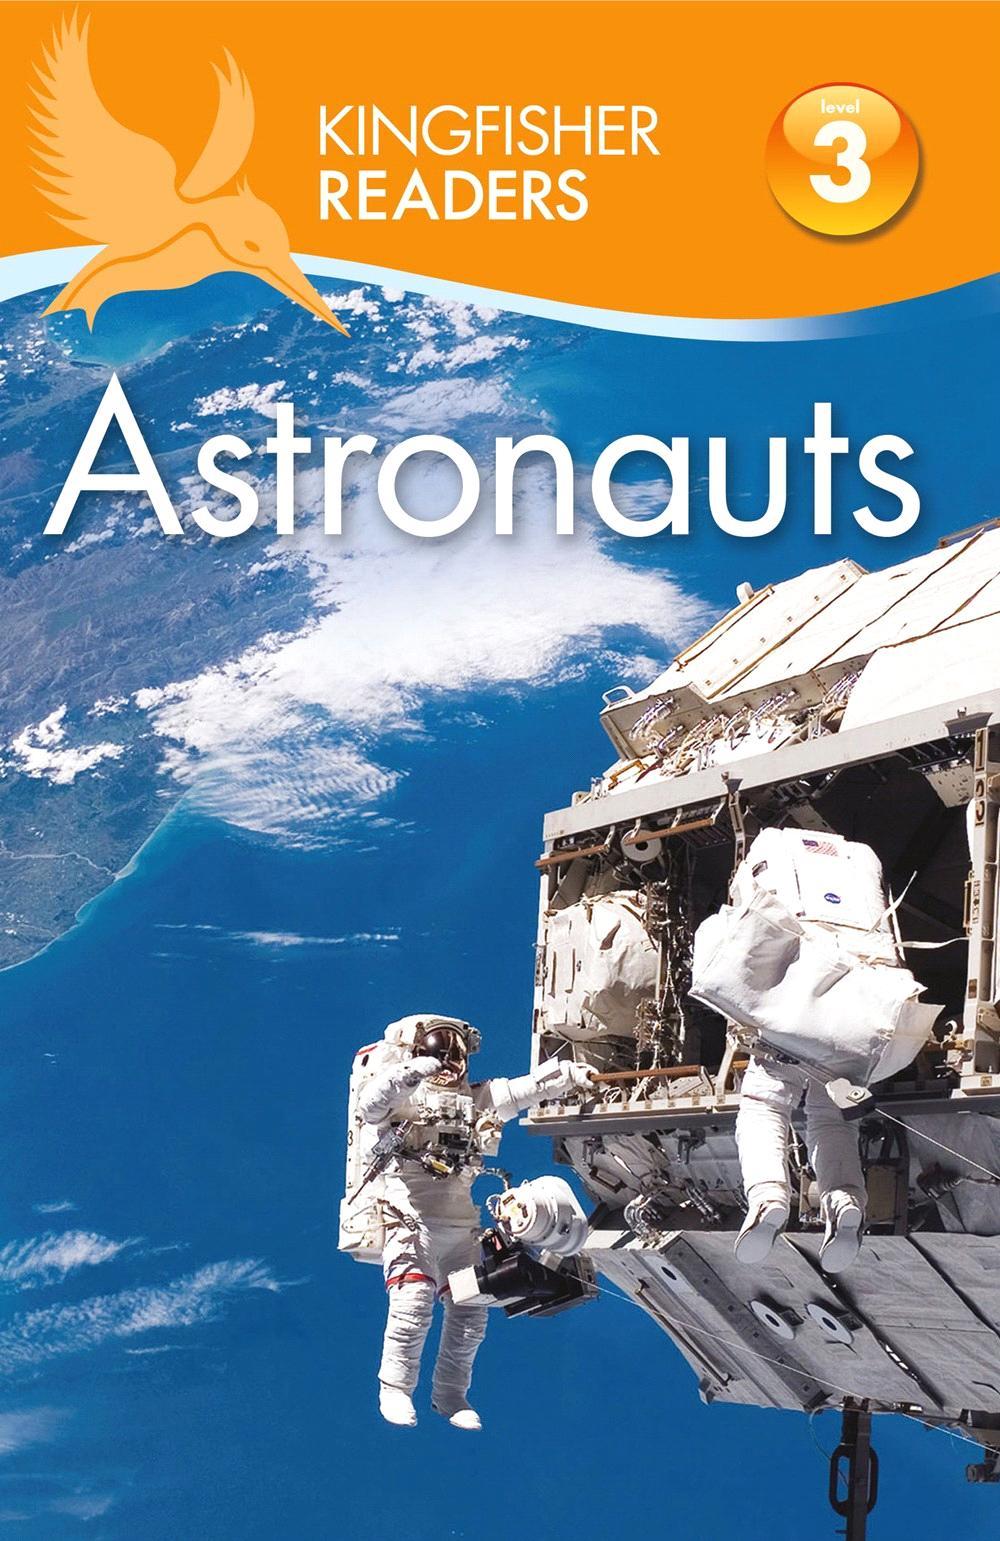 KINGFISHER 2015 JUVENILE NONFICTION / SCIENCE & NATURE / ASTRONOMY BY PHILIP STEELE Readers L3: Astronauts Exciting, Engaging, AND informative. Perfect to meet the Common Core State Standards!